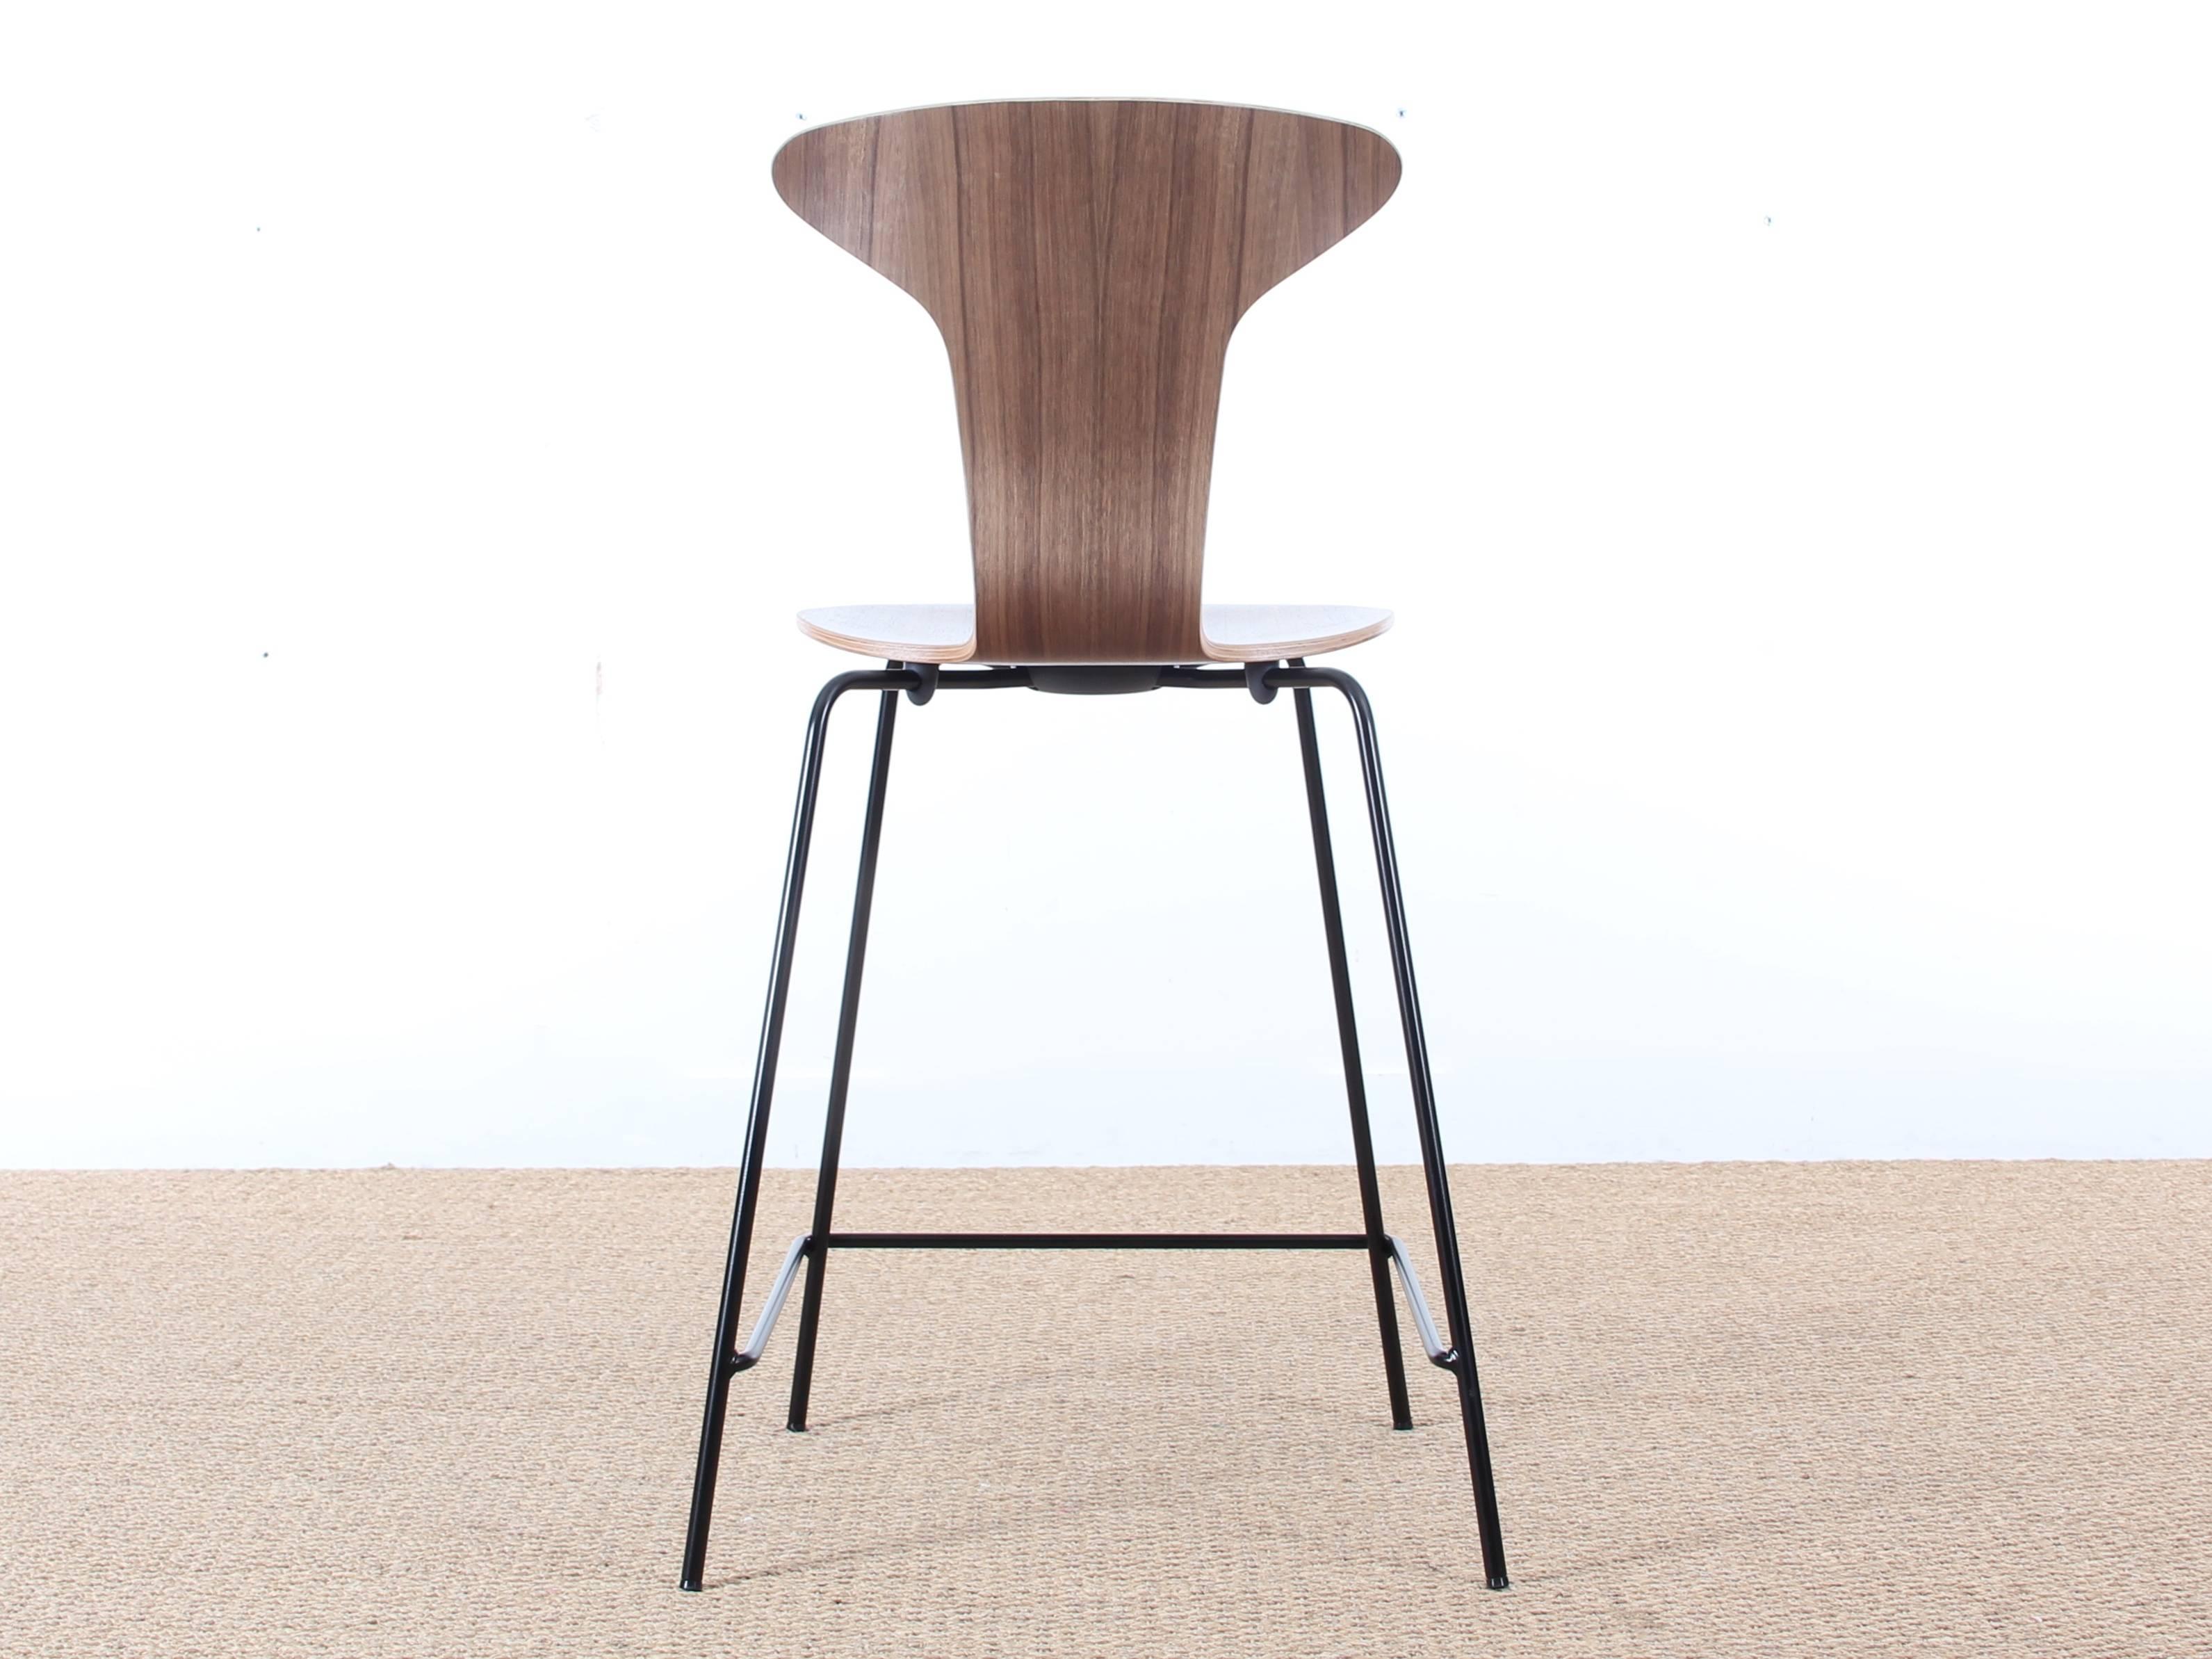 Mid-Century Modern Scandinavian barstool model Munkegaard by Arne Jacobsen. New release. Only in production from 1955 to the late 1960s (and for a brief period in the 1990s), the distinctive chair has its roots in the Munkegaard School, north of